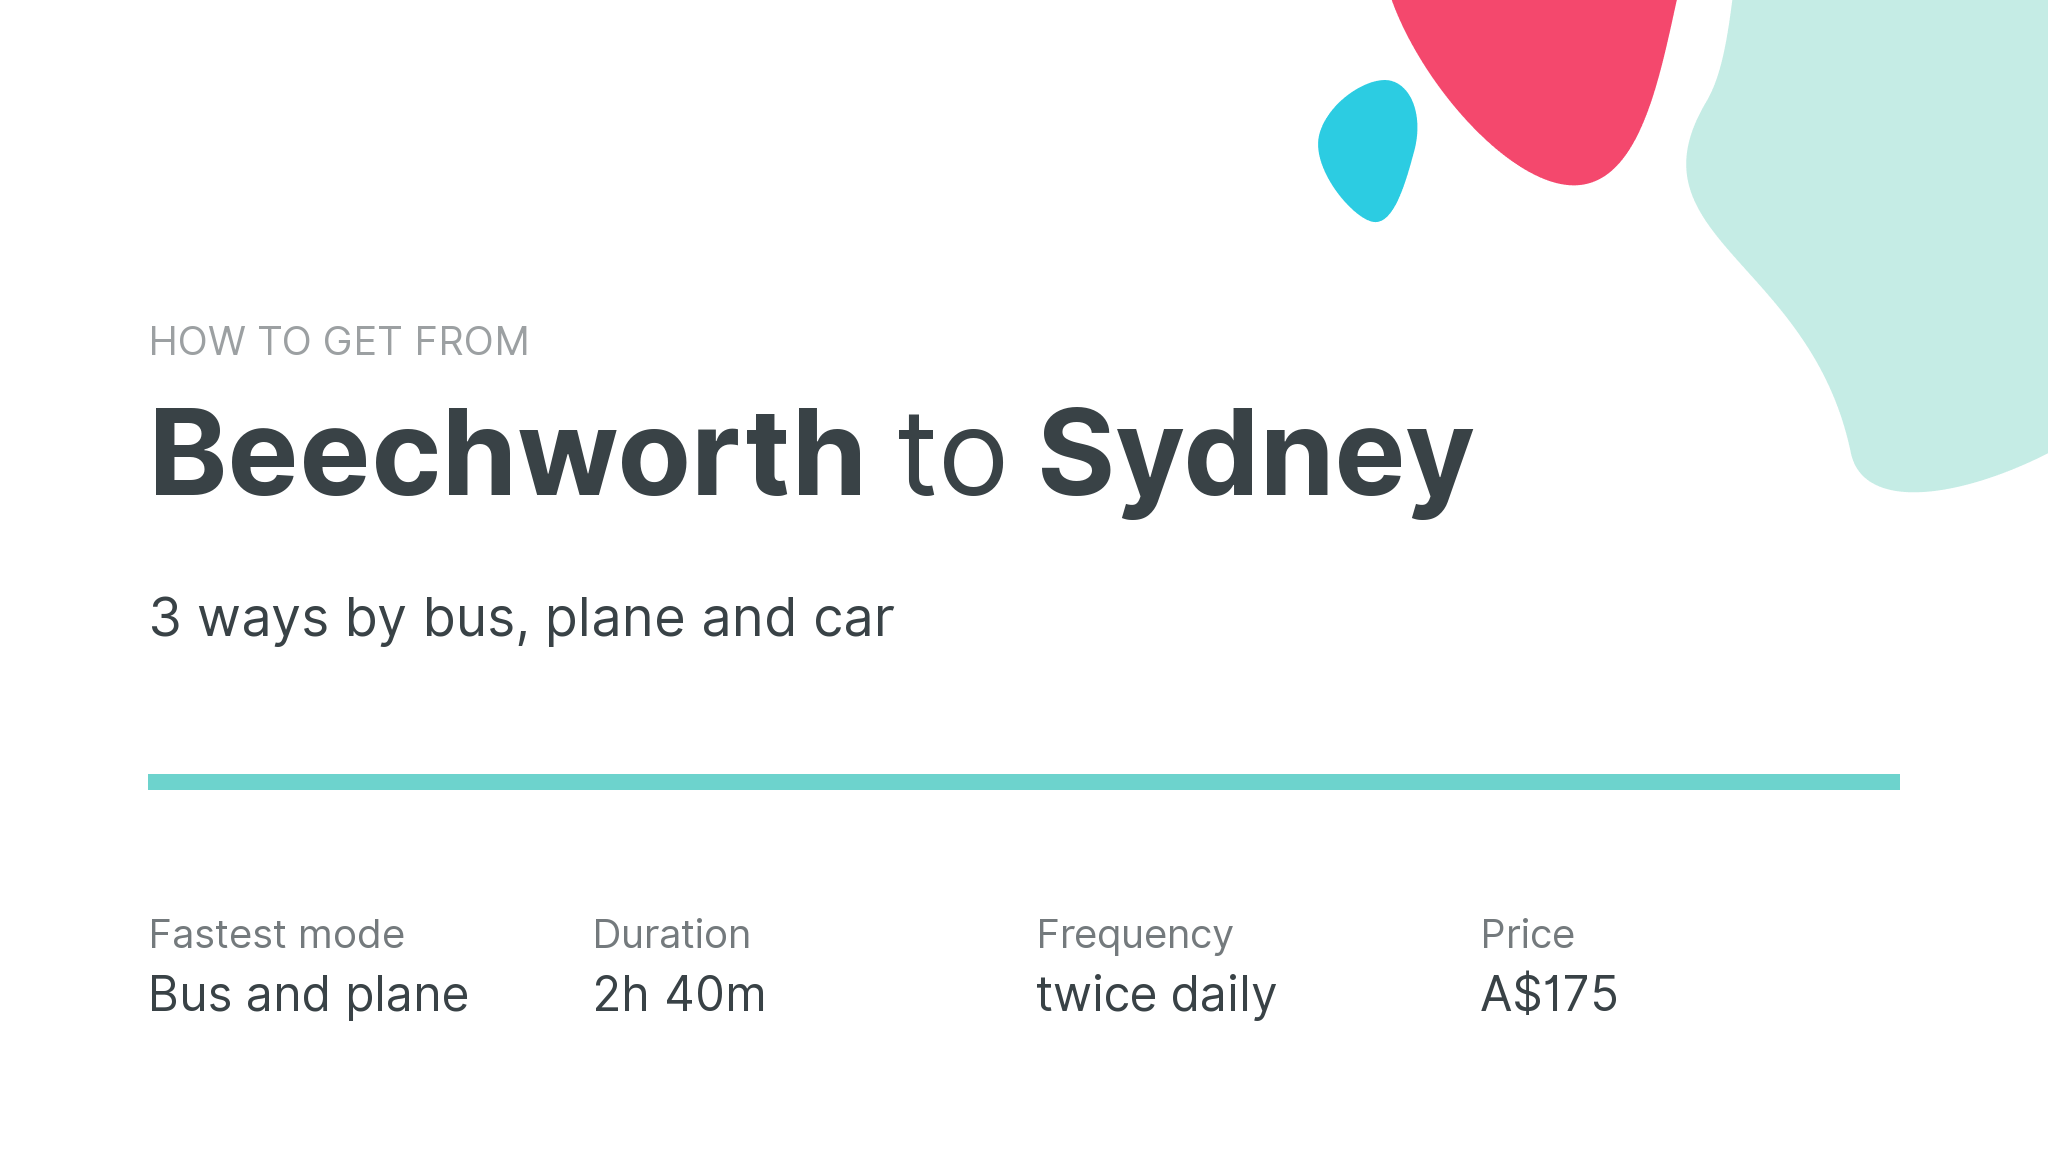 How do I get from Beechworth to Sydney